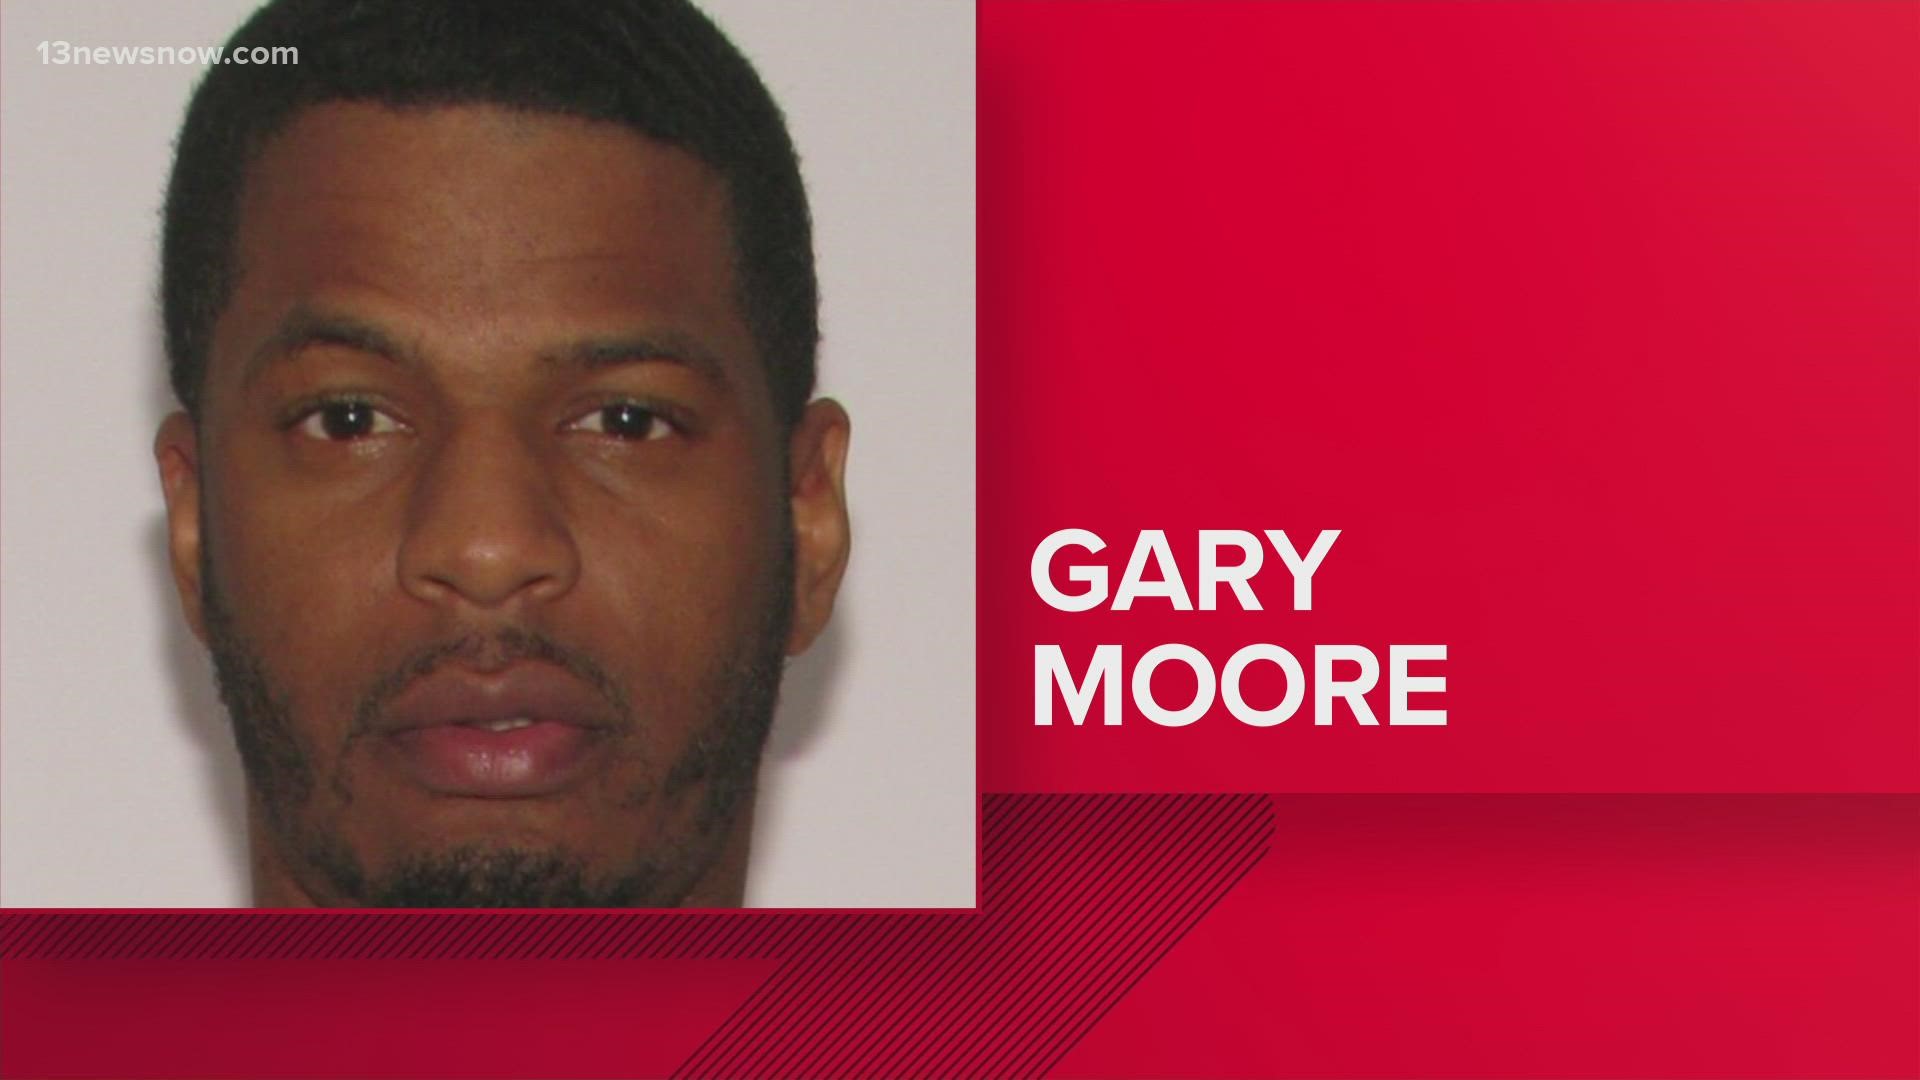 Nearly two months later, police have arrested 39-year-old Gary L. Moore in connection to the shooting.